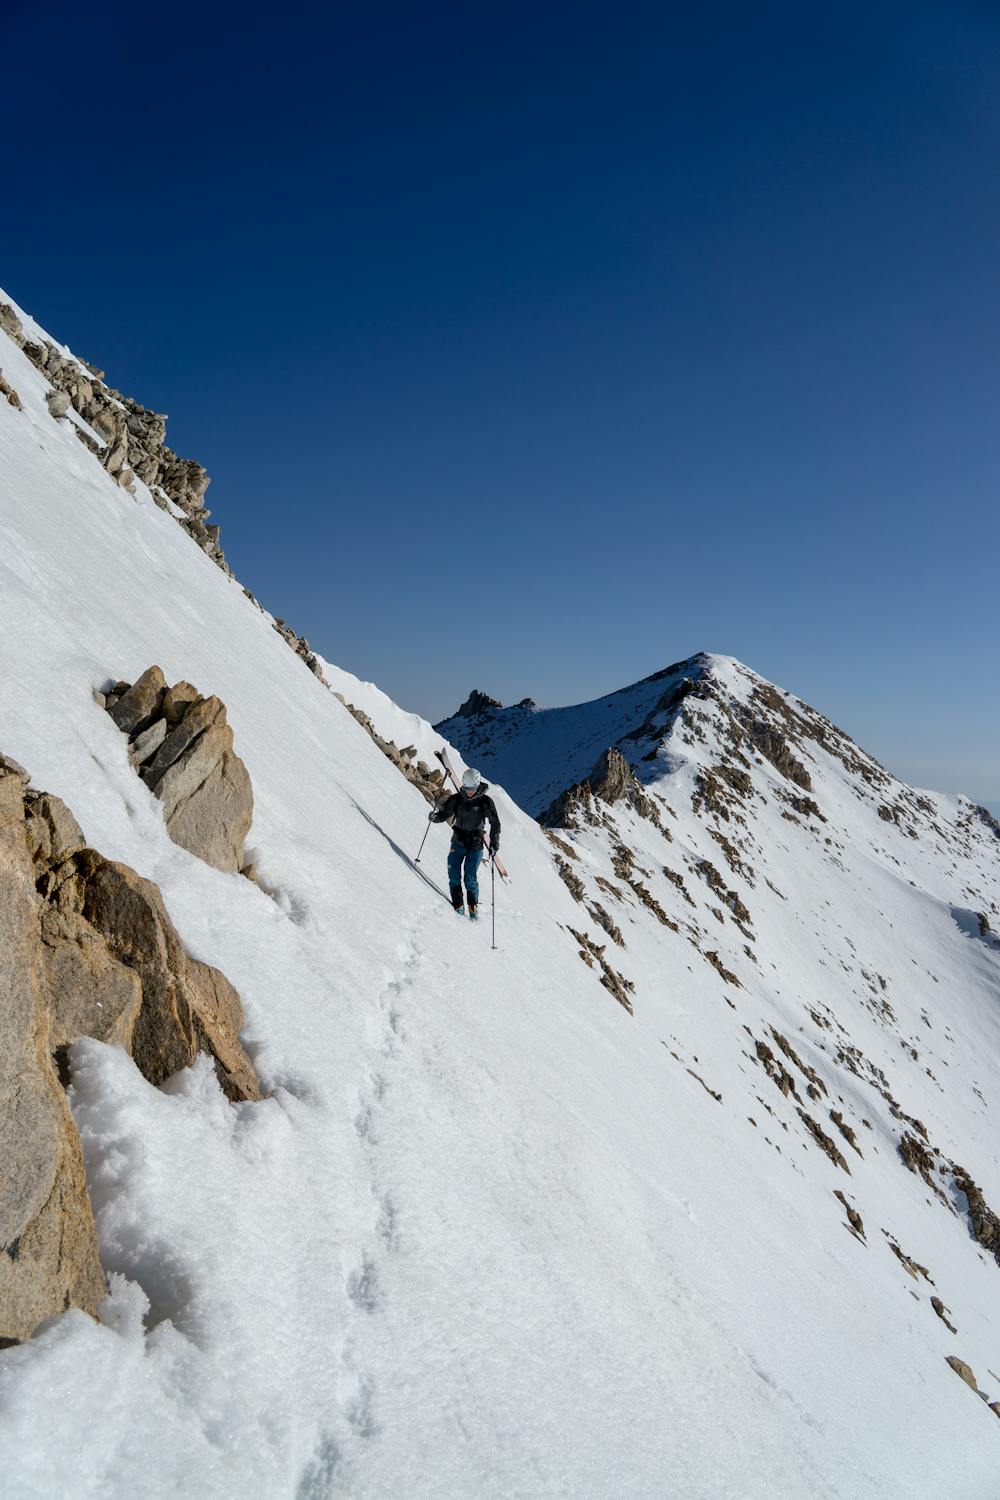 Traversing to the summit of Montgomery with Boundary Peak in the background